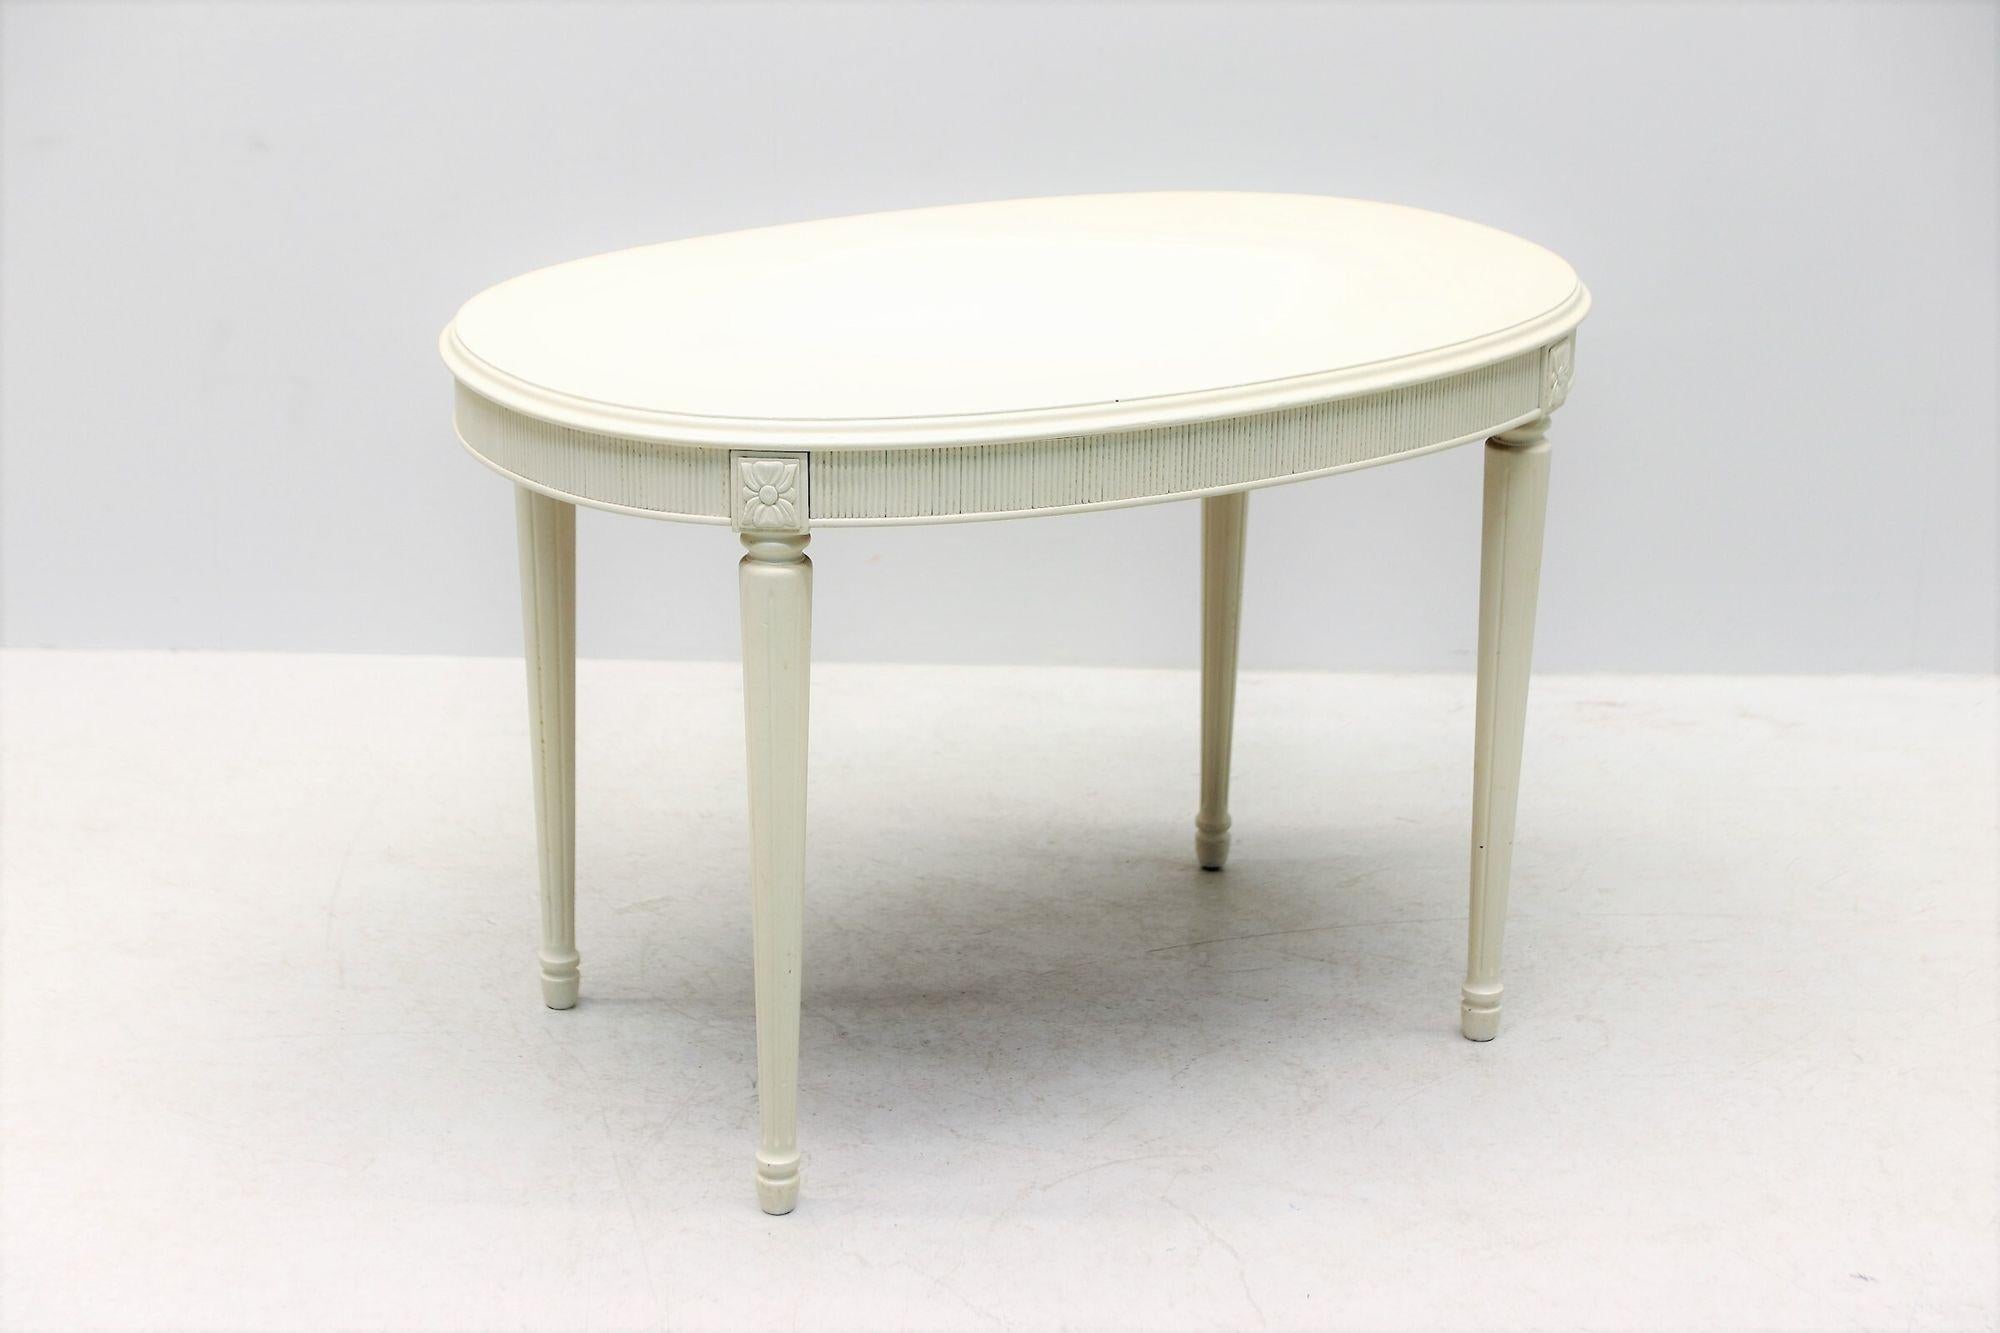 20th Century 1900s White Painted Swedish Gustavian Style Salon Table For Sale